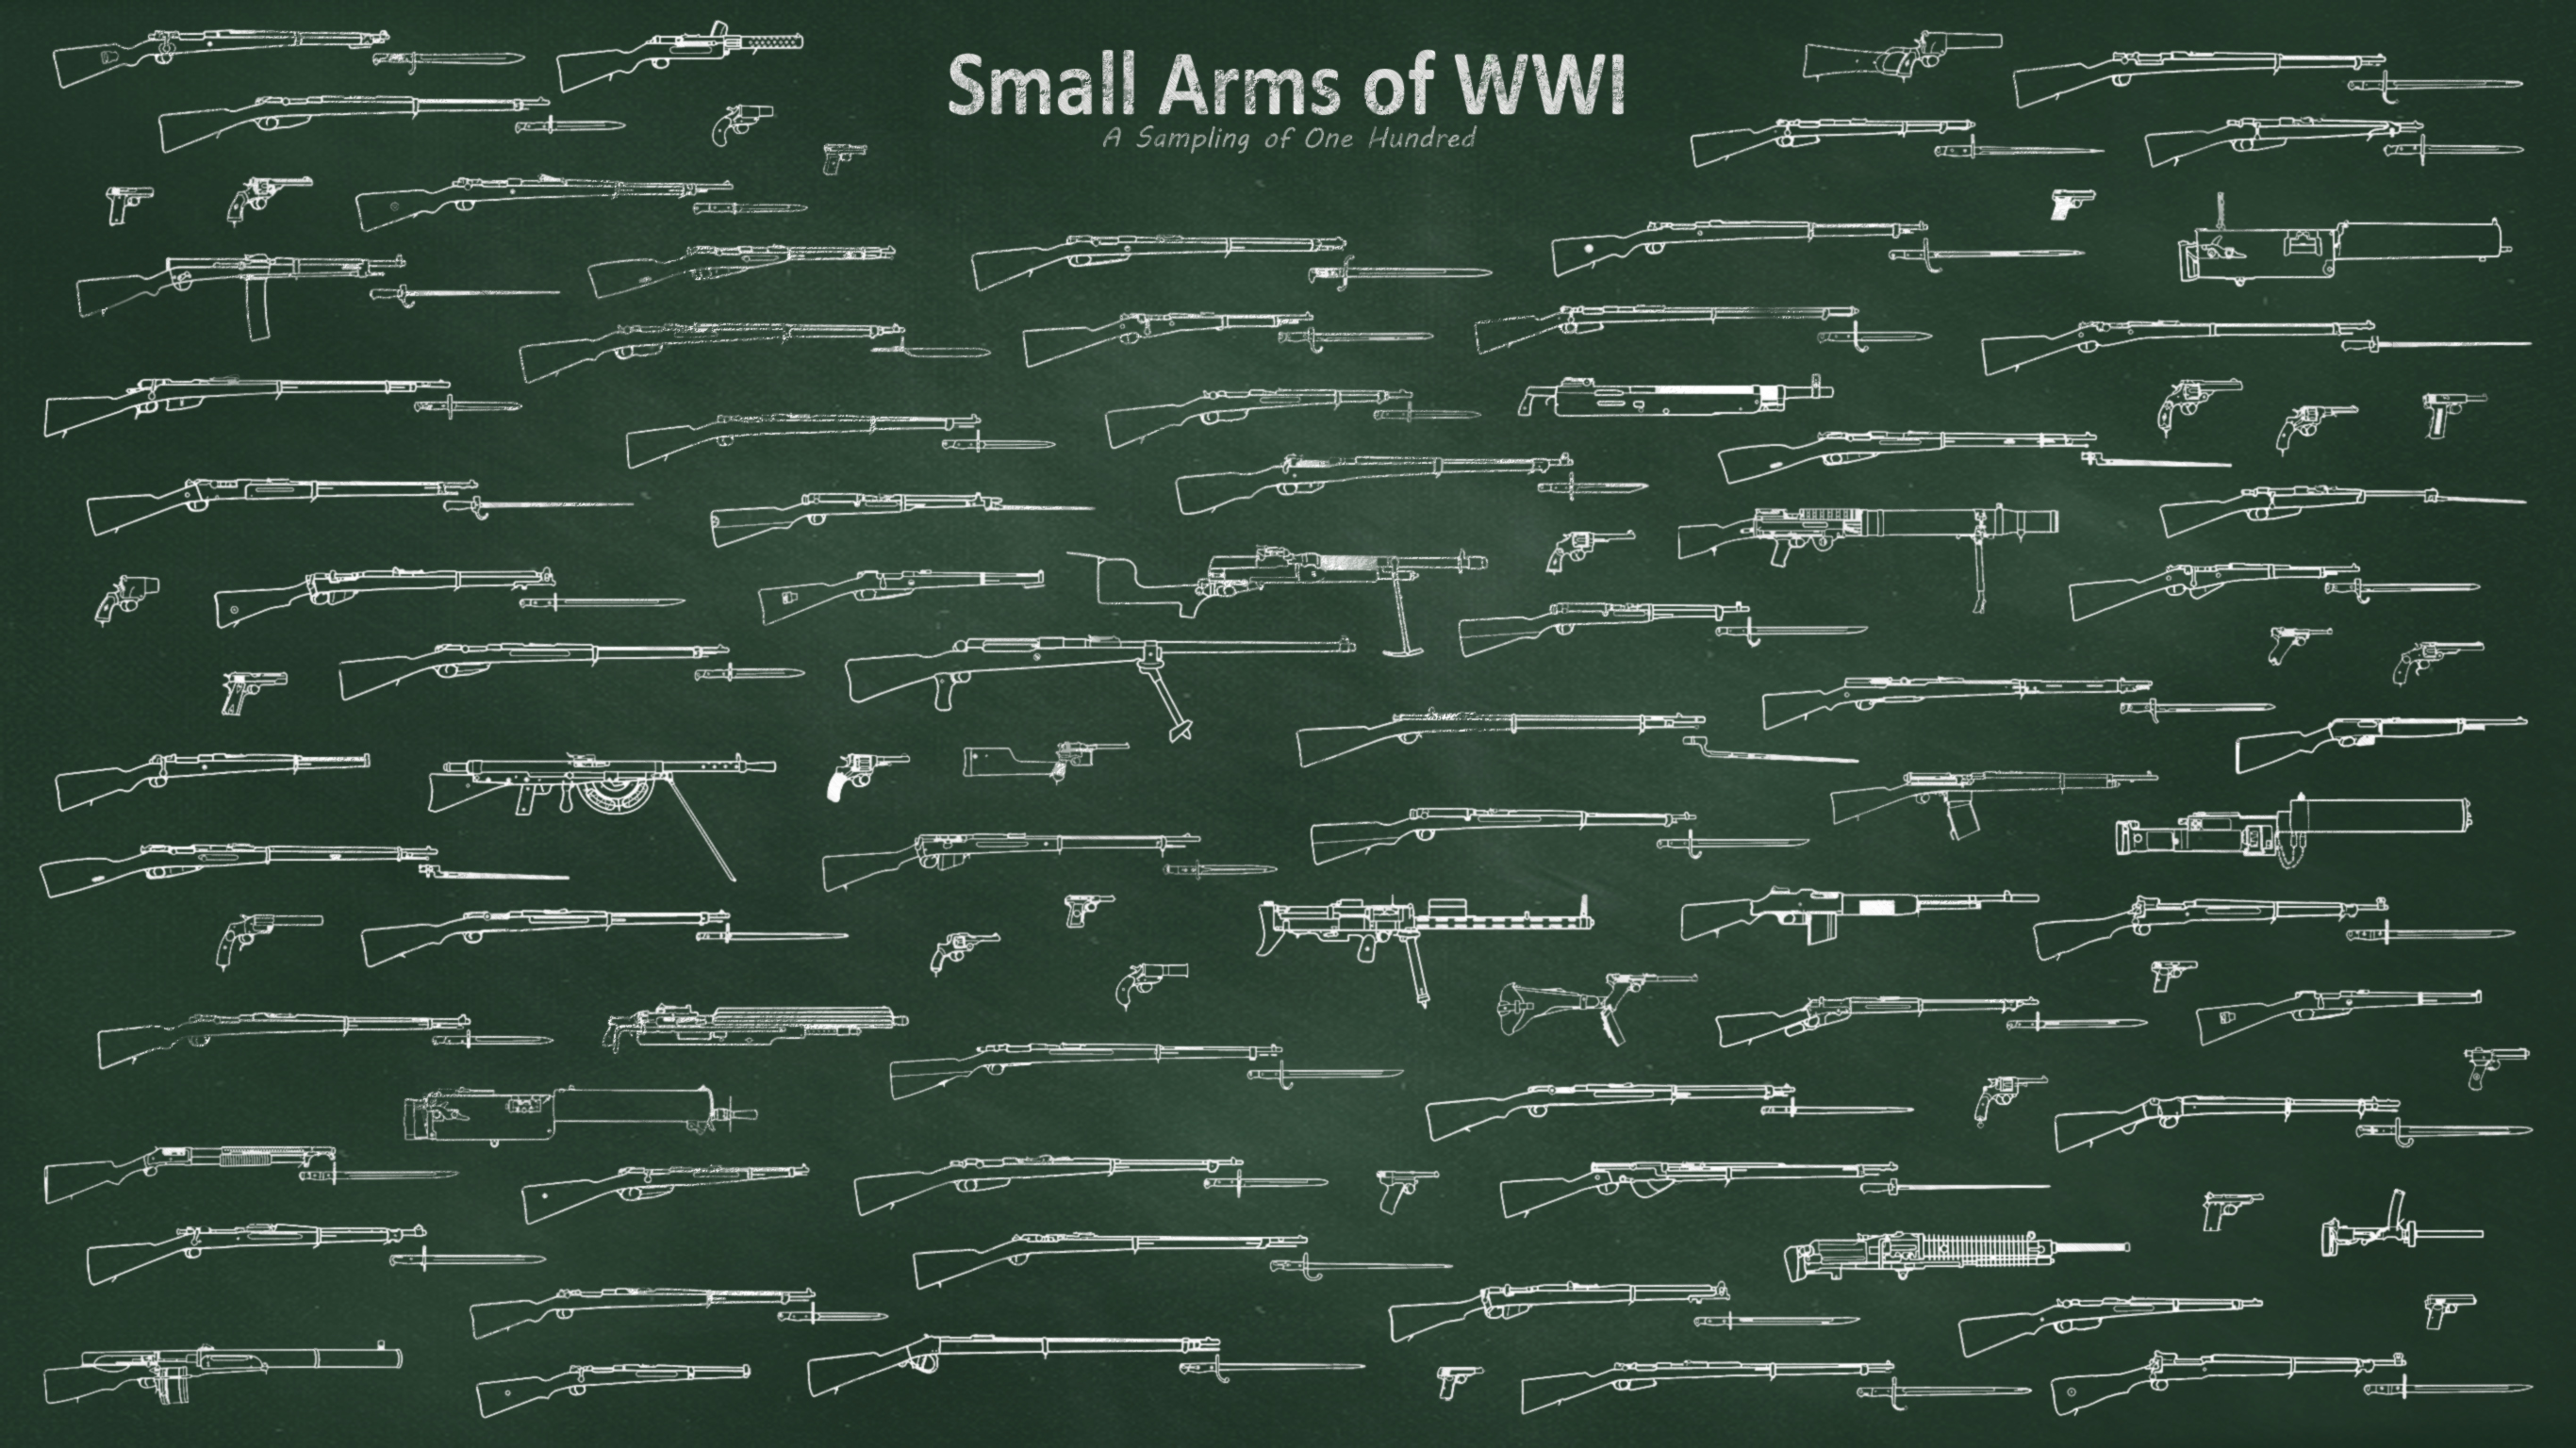 Savage Arms Wallpaper All the small arms of wwi